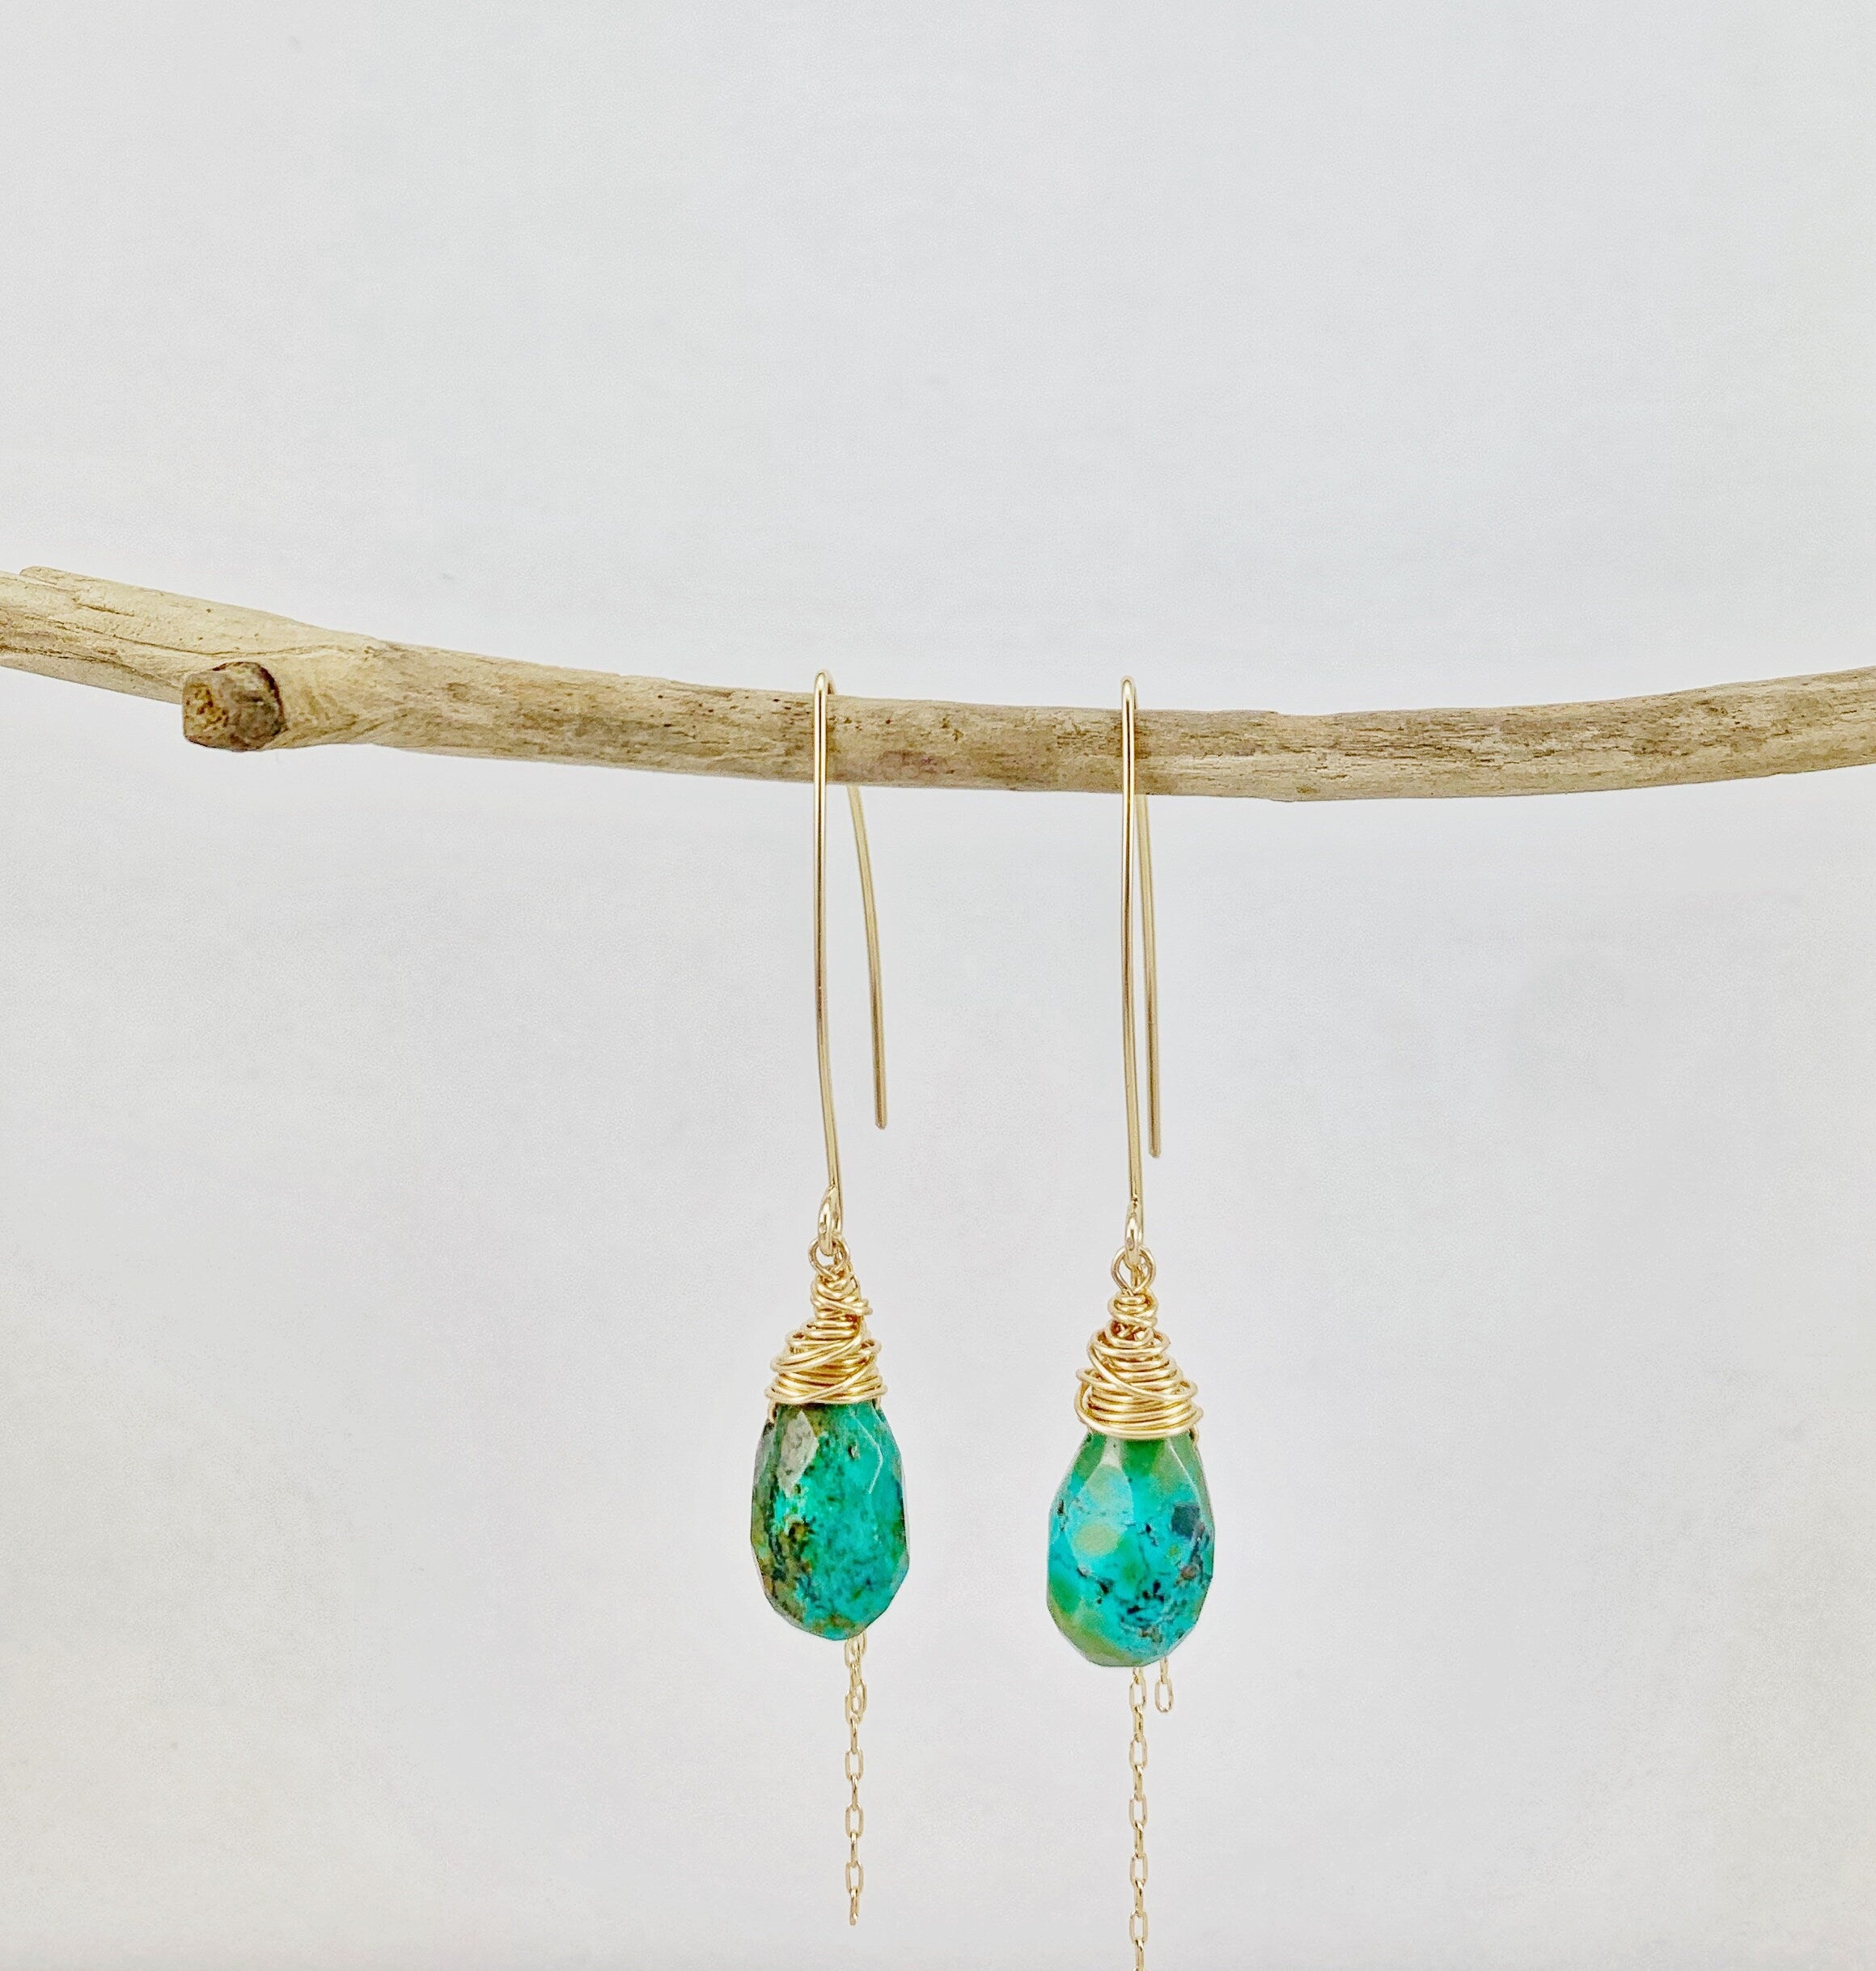 Gold Turquoise Earrings, gold wire wrapped earrings, turquoise drop earrings, boho earrings, turquoise earrings